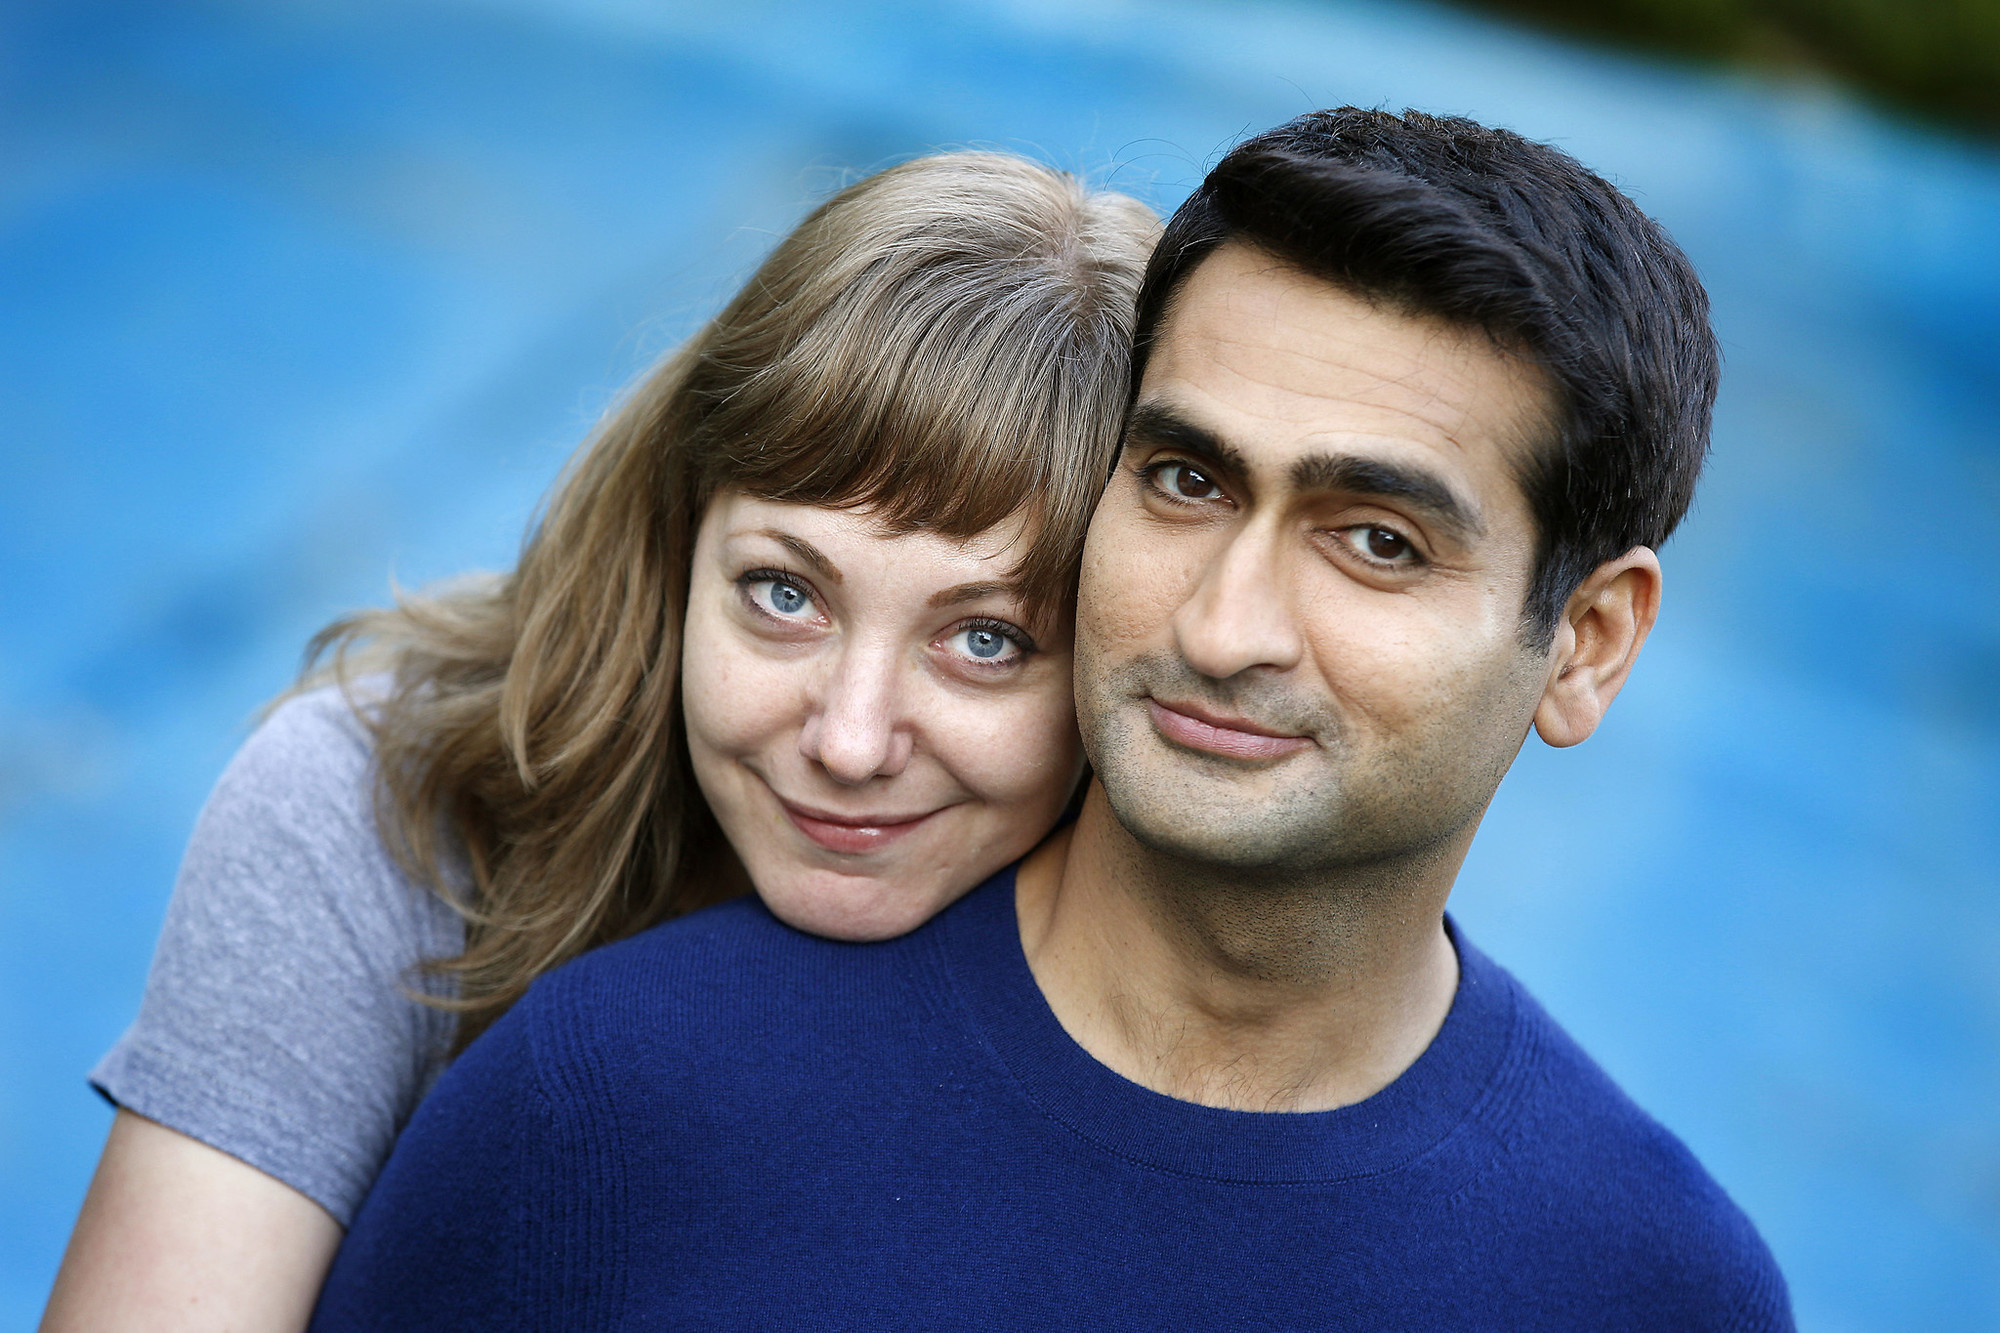 Kumail and Emily